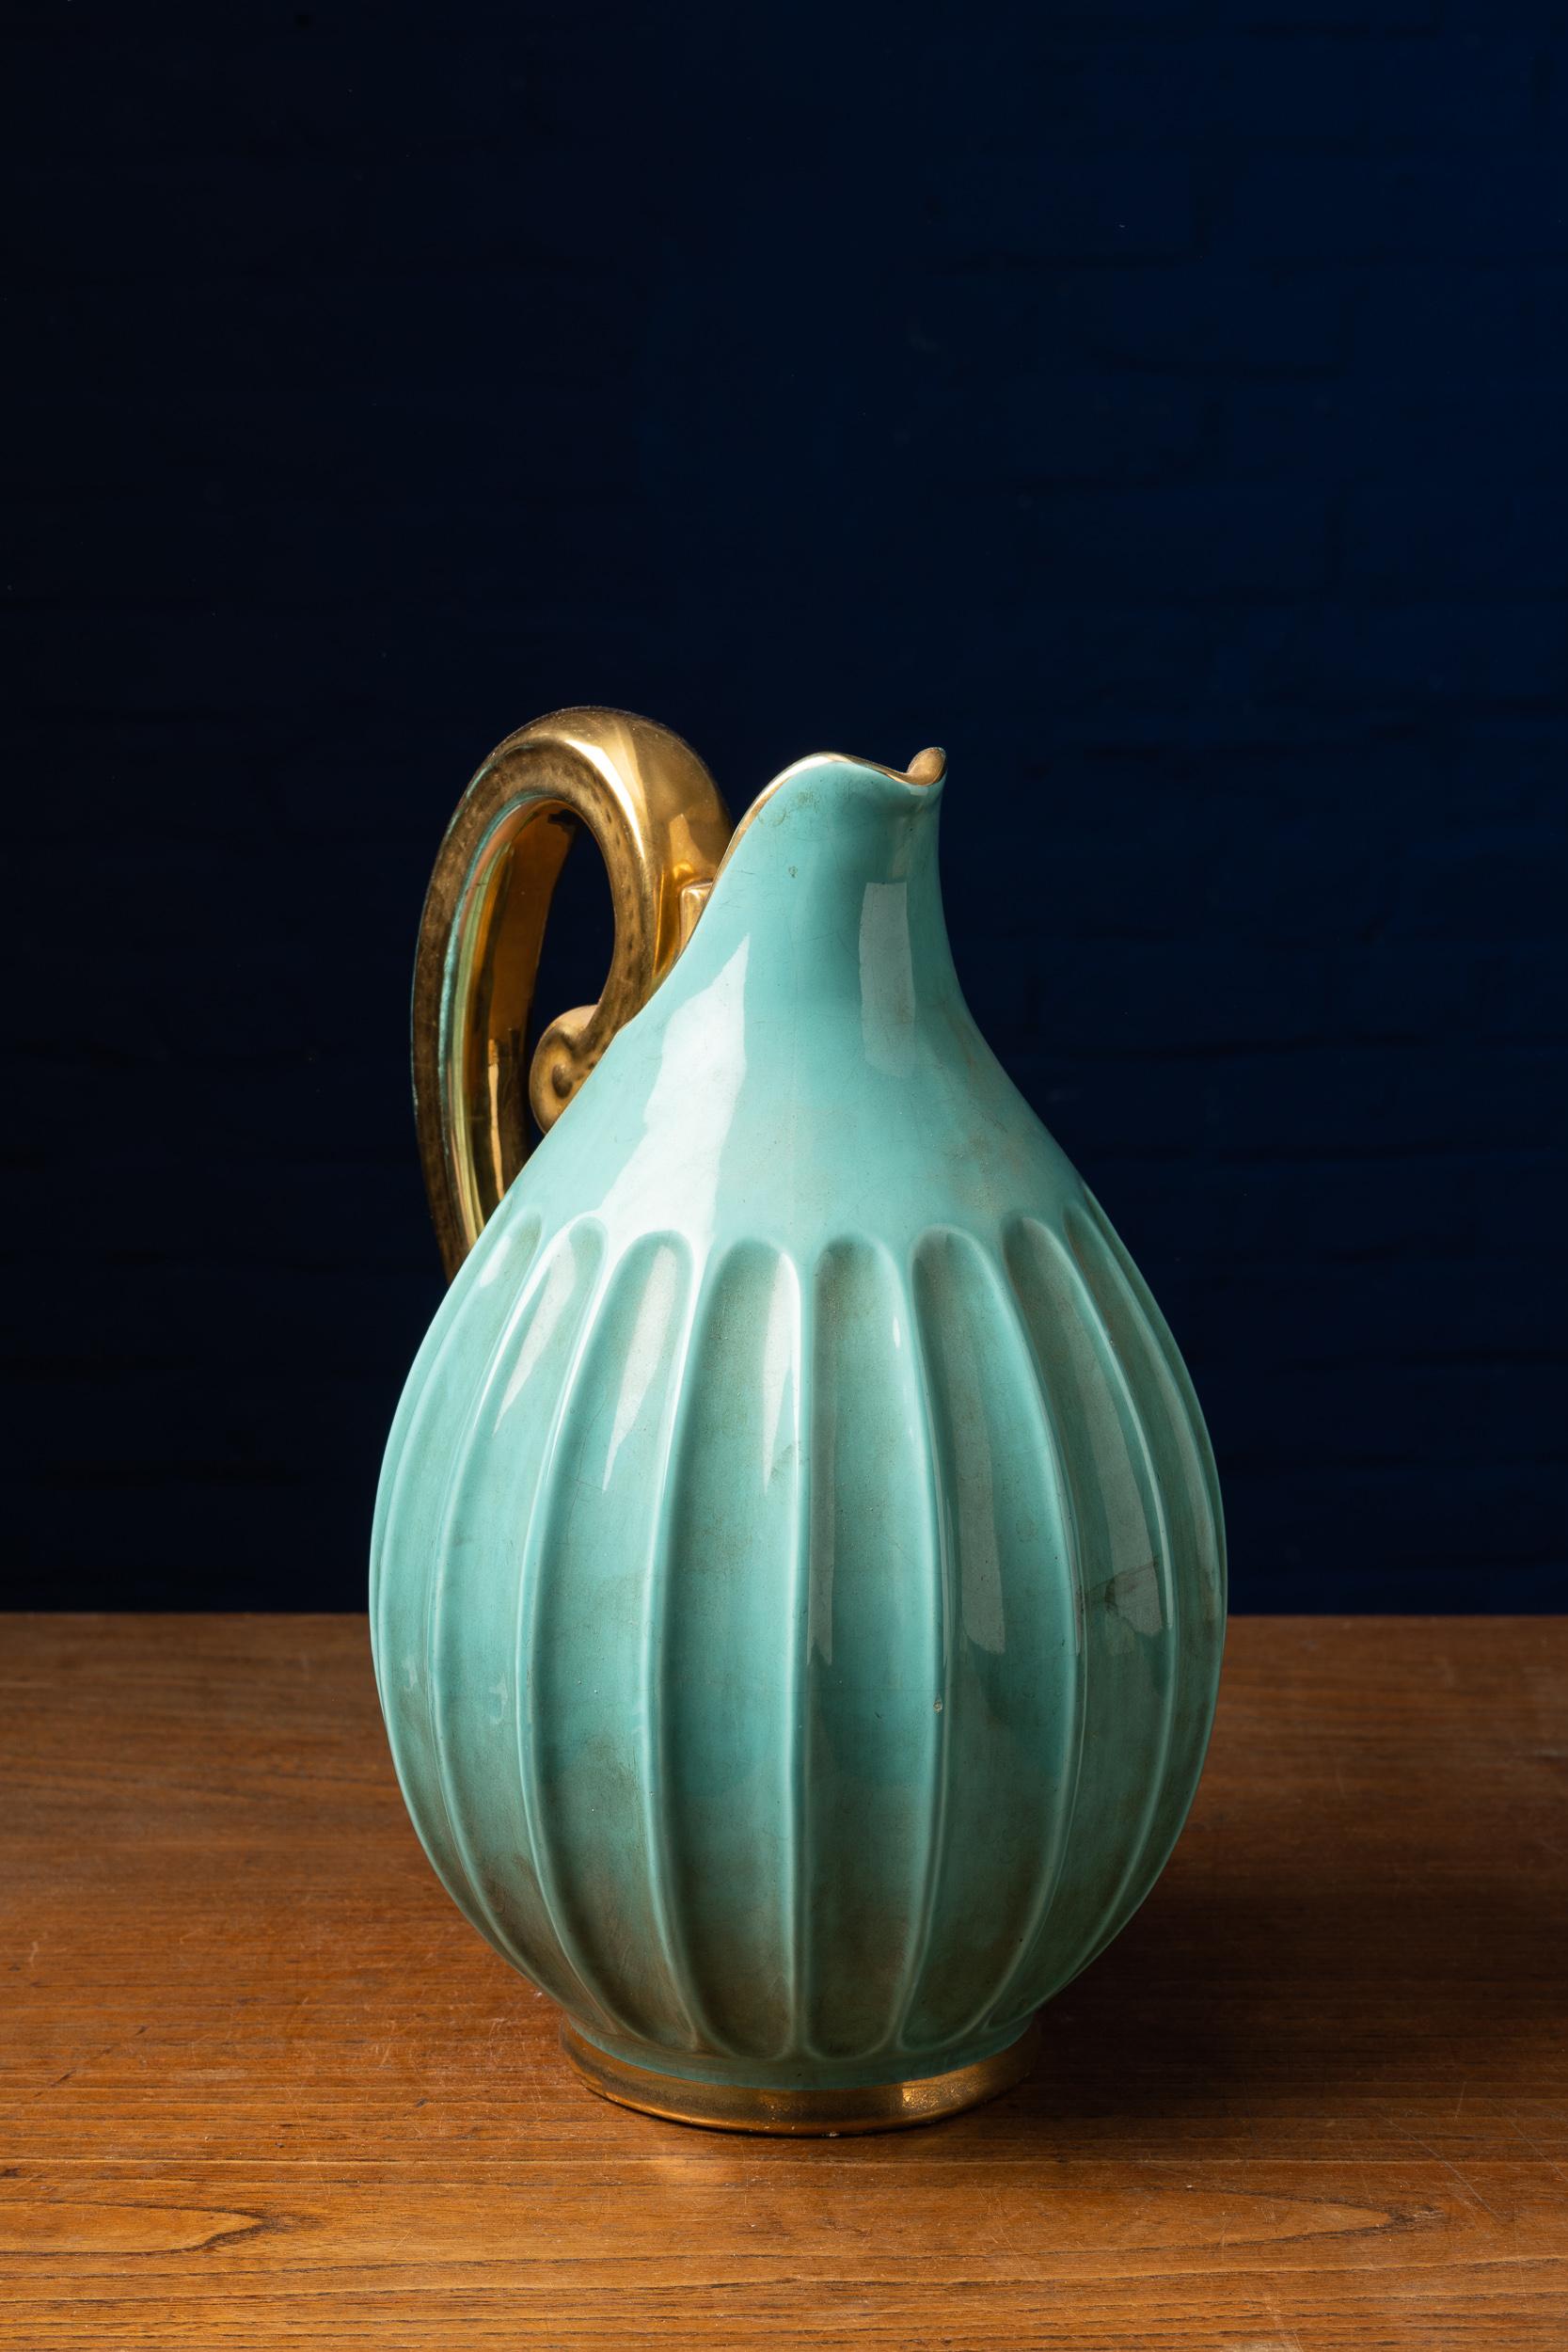 Gorgeous vintage ribbed ceramics vase with turquoise and gold glaze beautifully crafted by Belgian artist Alexandra Wemmel (1909-1964). This remarkable item is tagged on the bottom 